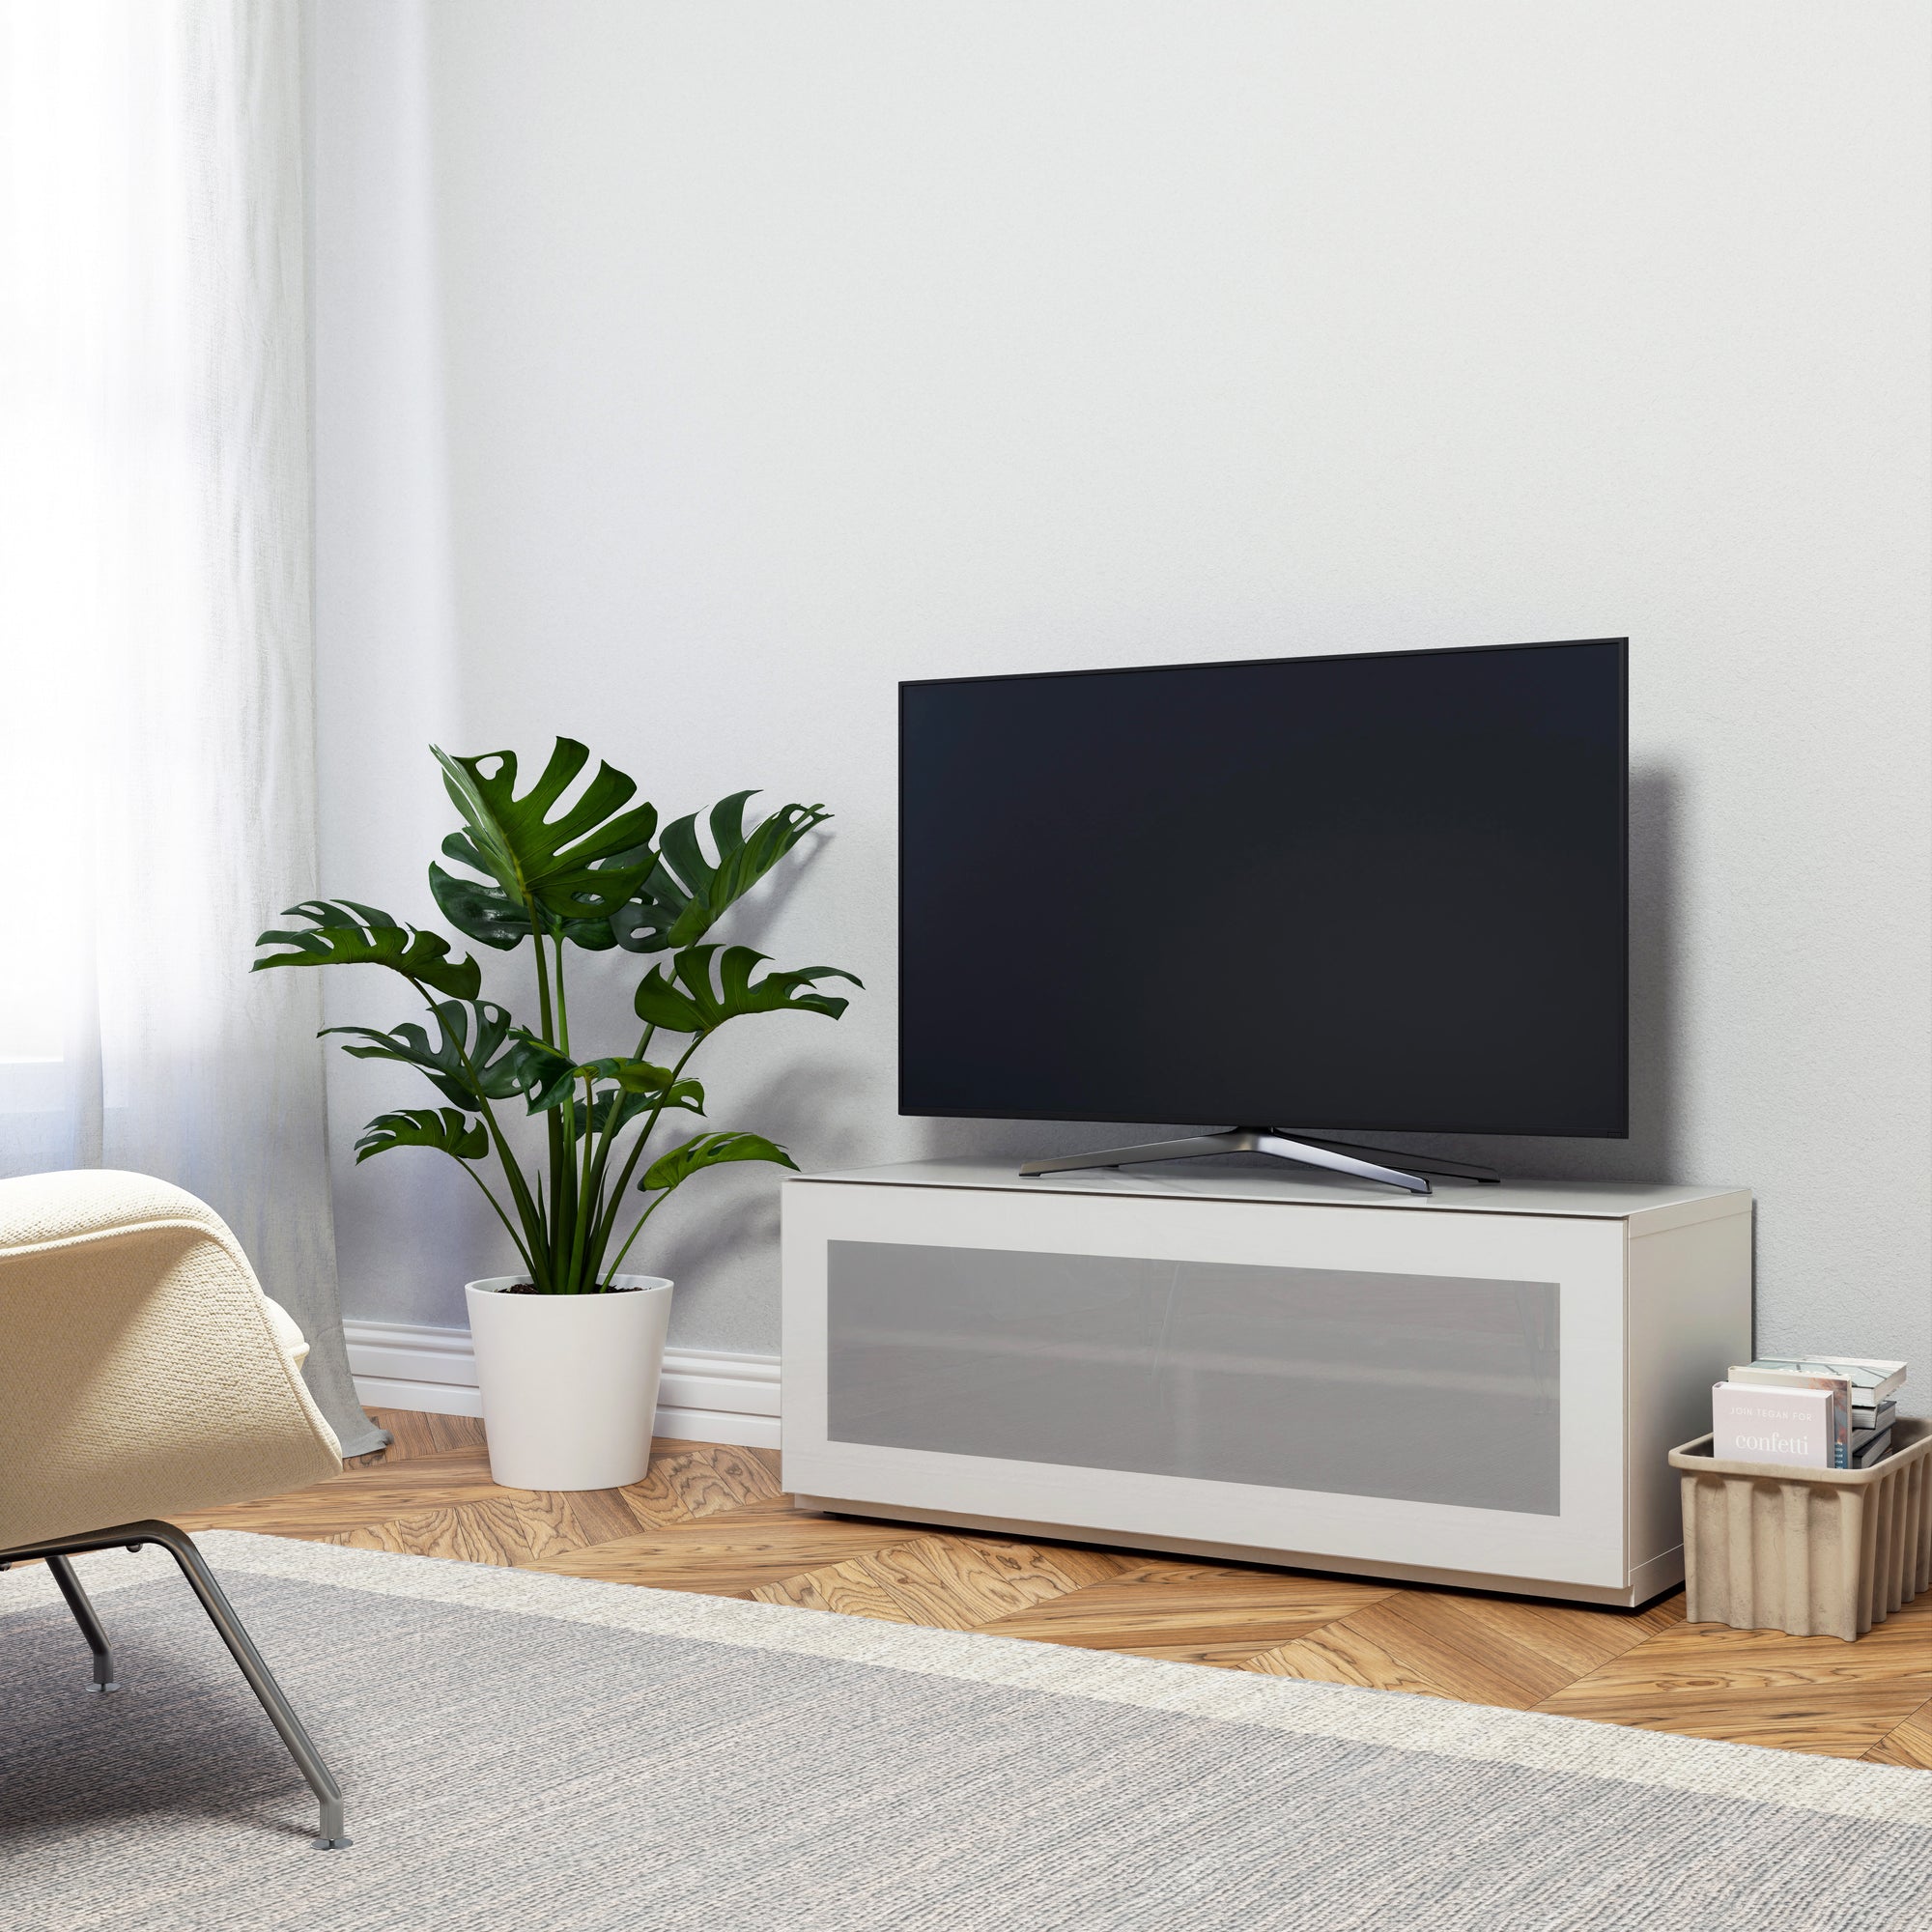 Sonorous Studio ST110 Modern TV Stand w/ Hidden Wheels for TVs up to 65" - White / White Glass Cover